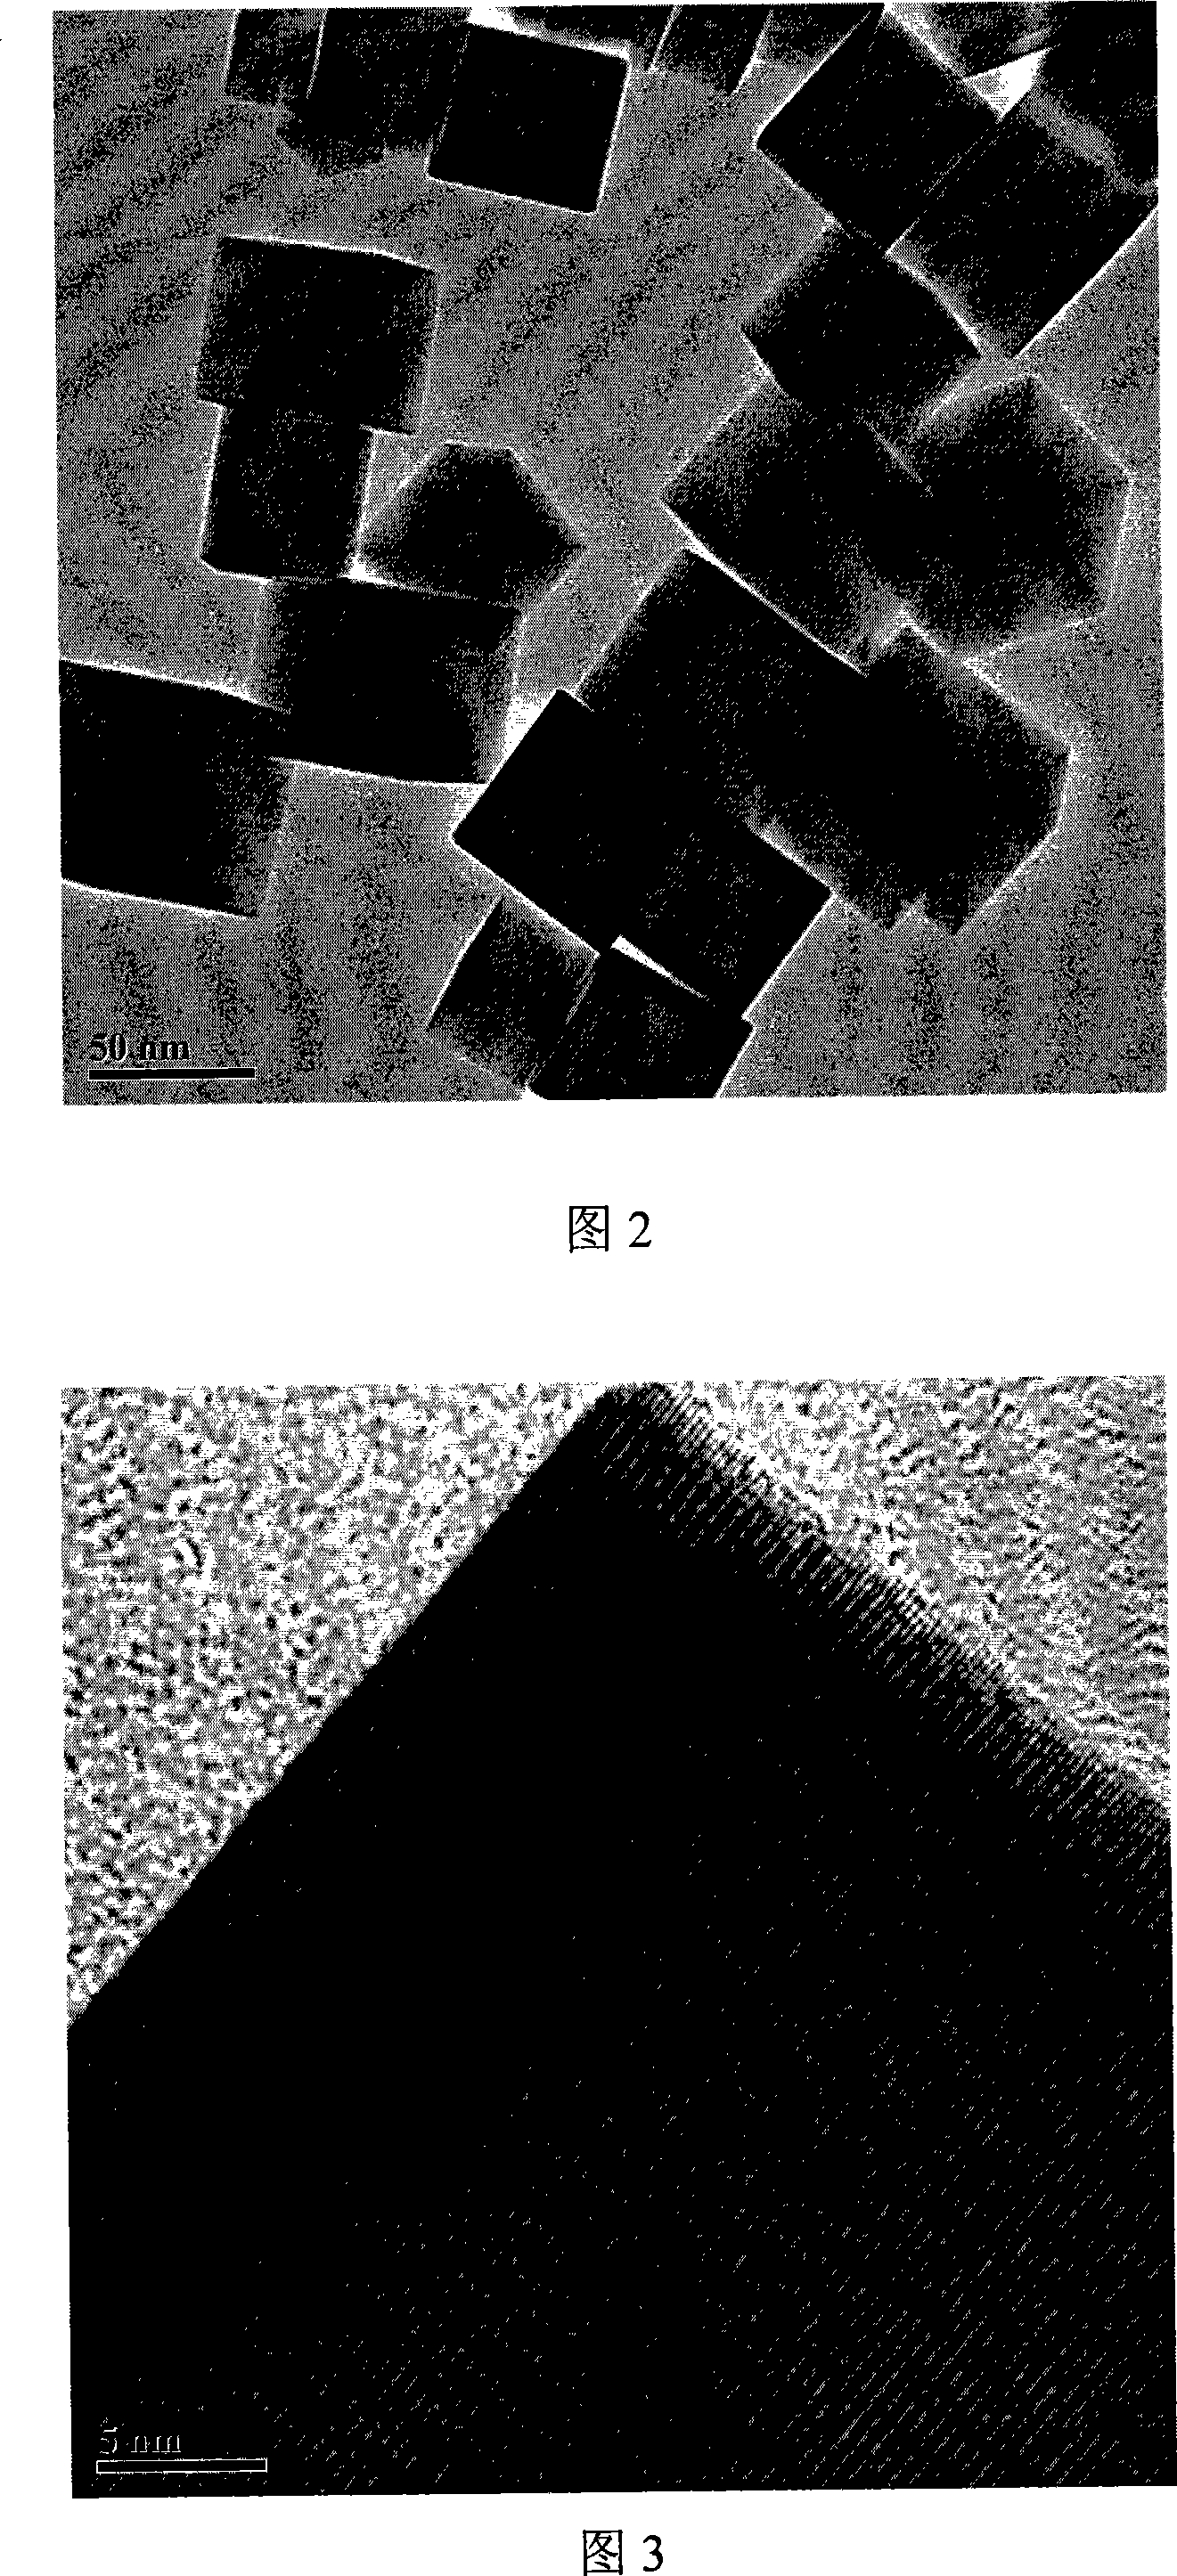 Process for producing indium oxide nanocrystalline with controlled shape